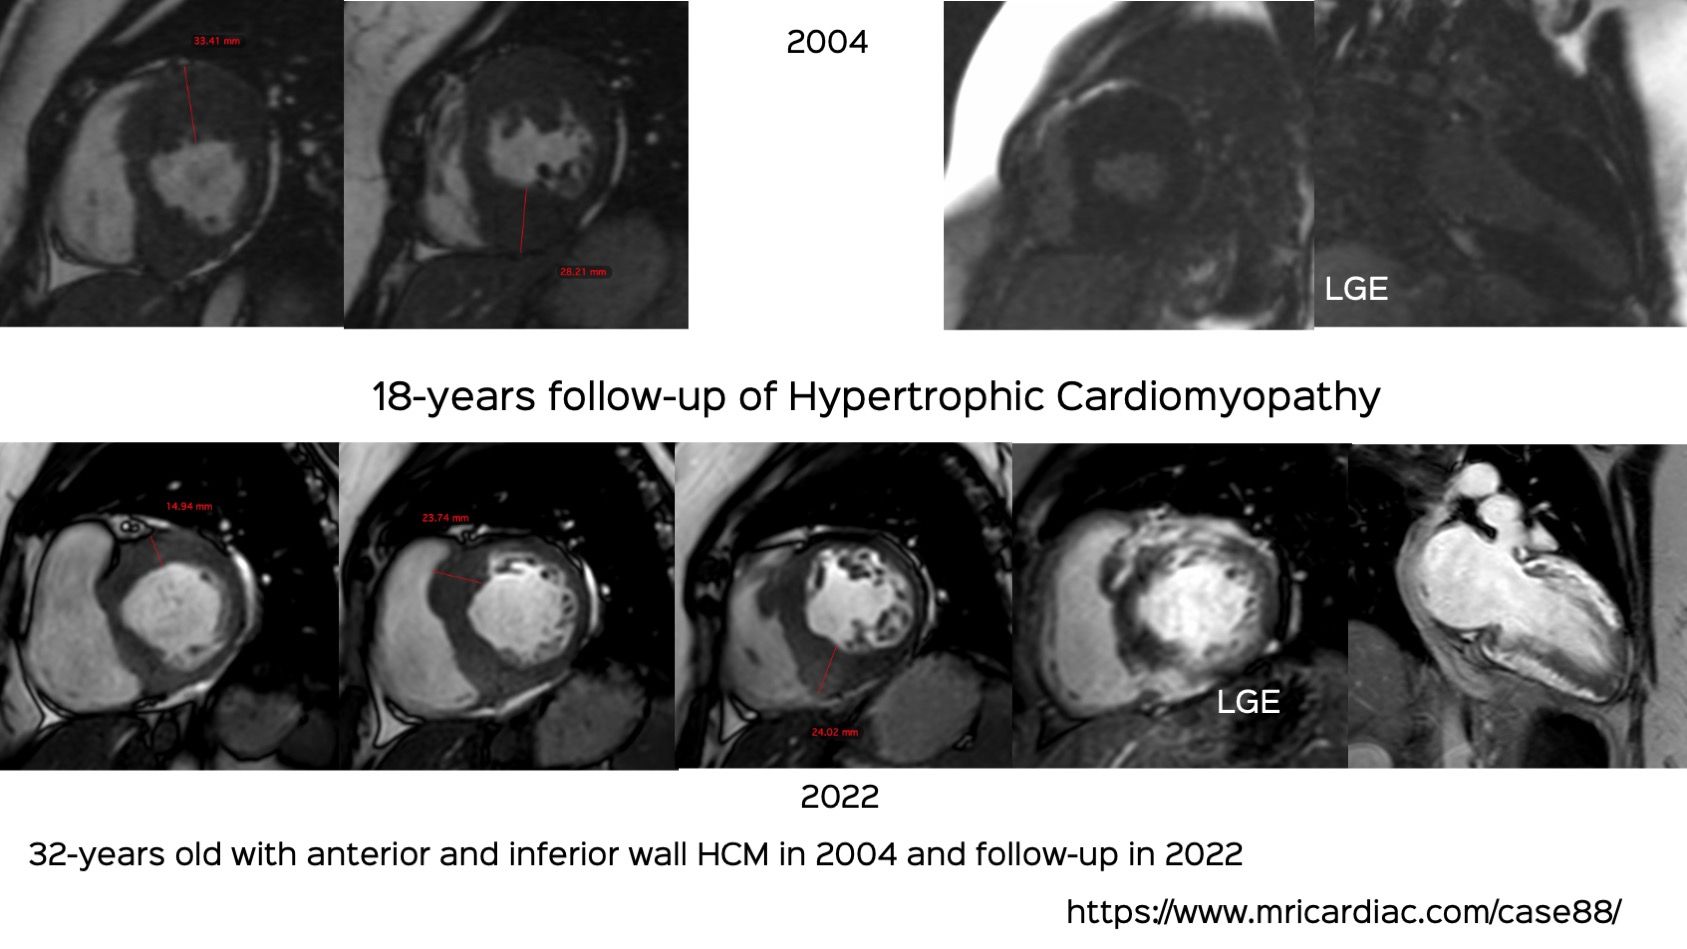 Case 88: Hypertrophic Cardiomyopathy – 18 Years CMR Follow-Up